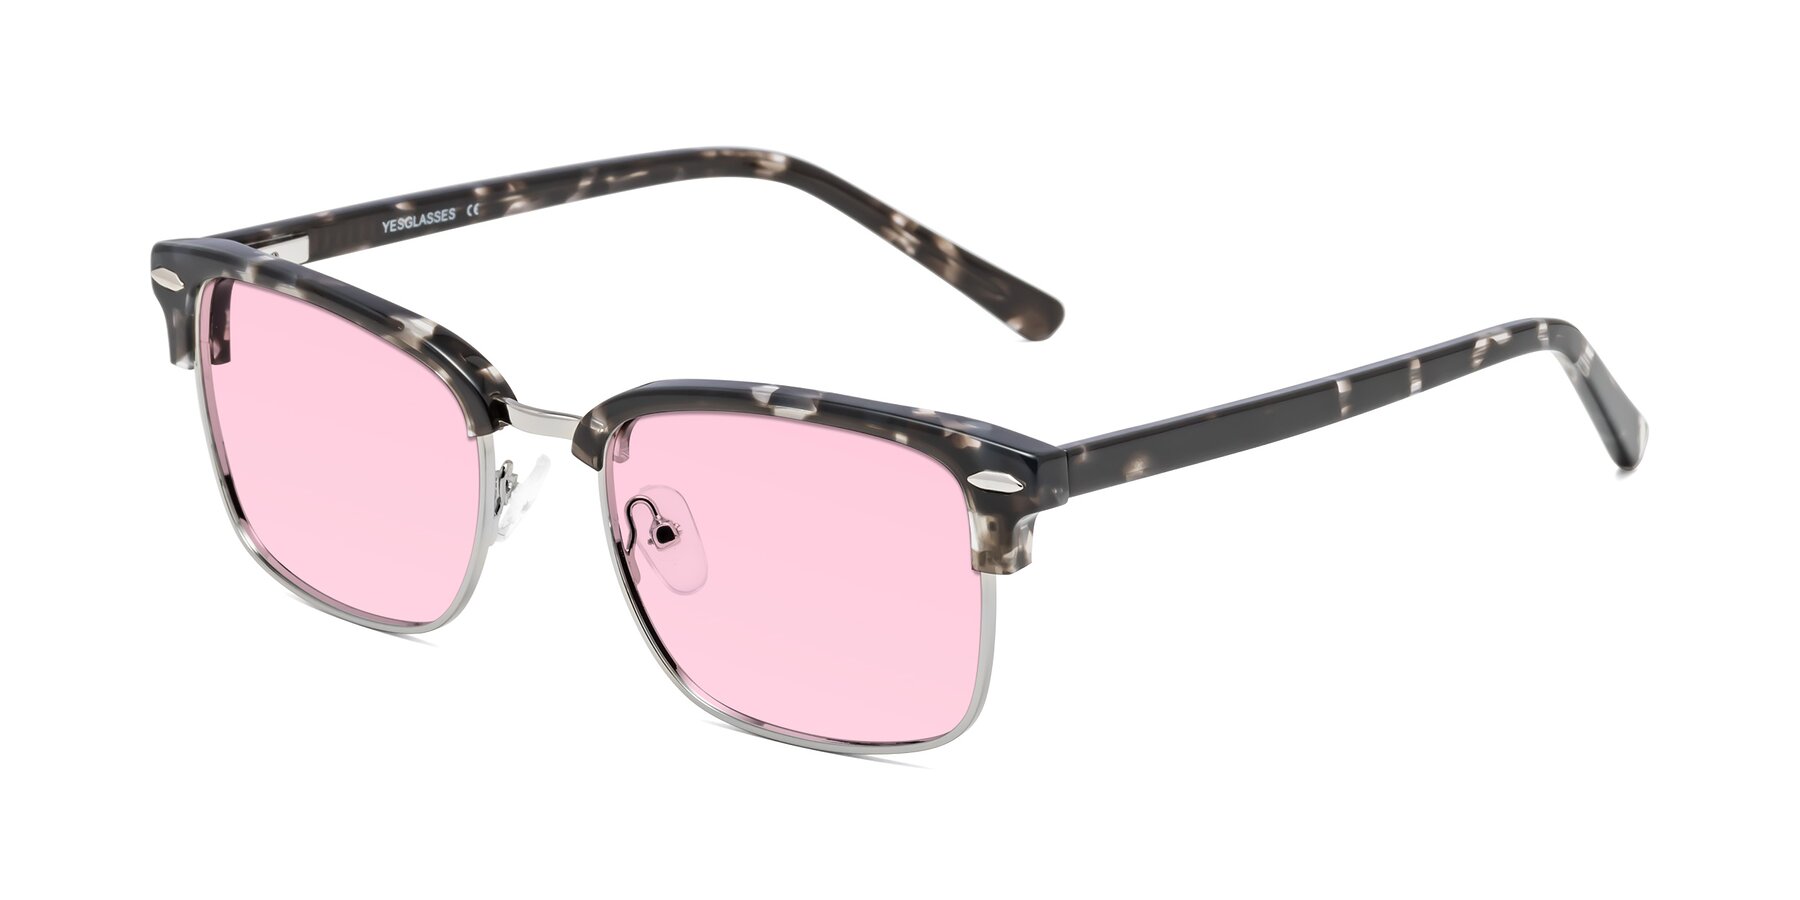 Angle of 17464 in Tortoise-Silver with Light Pink Tinted Lenses